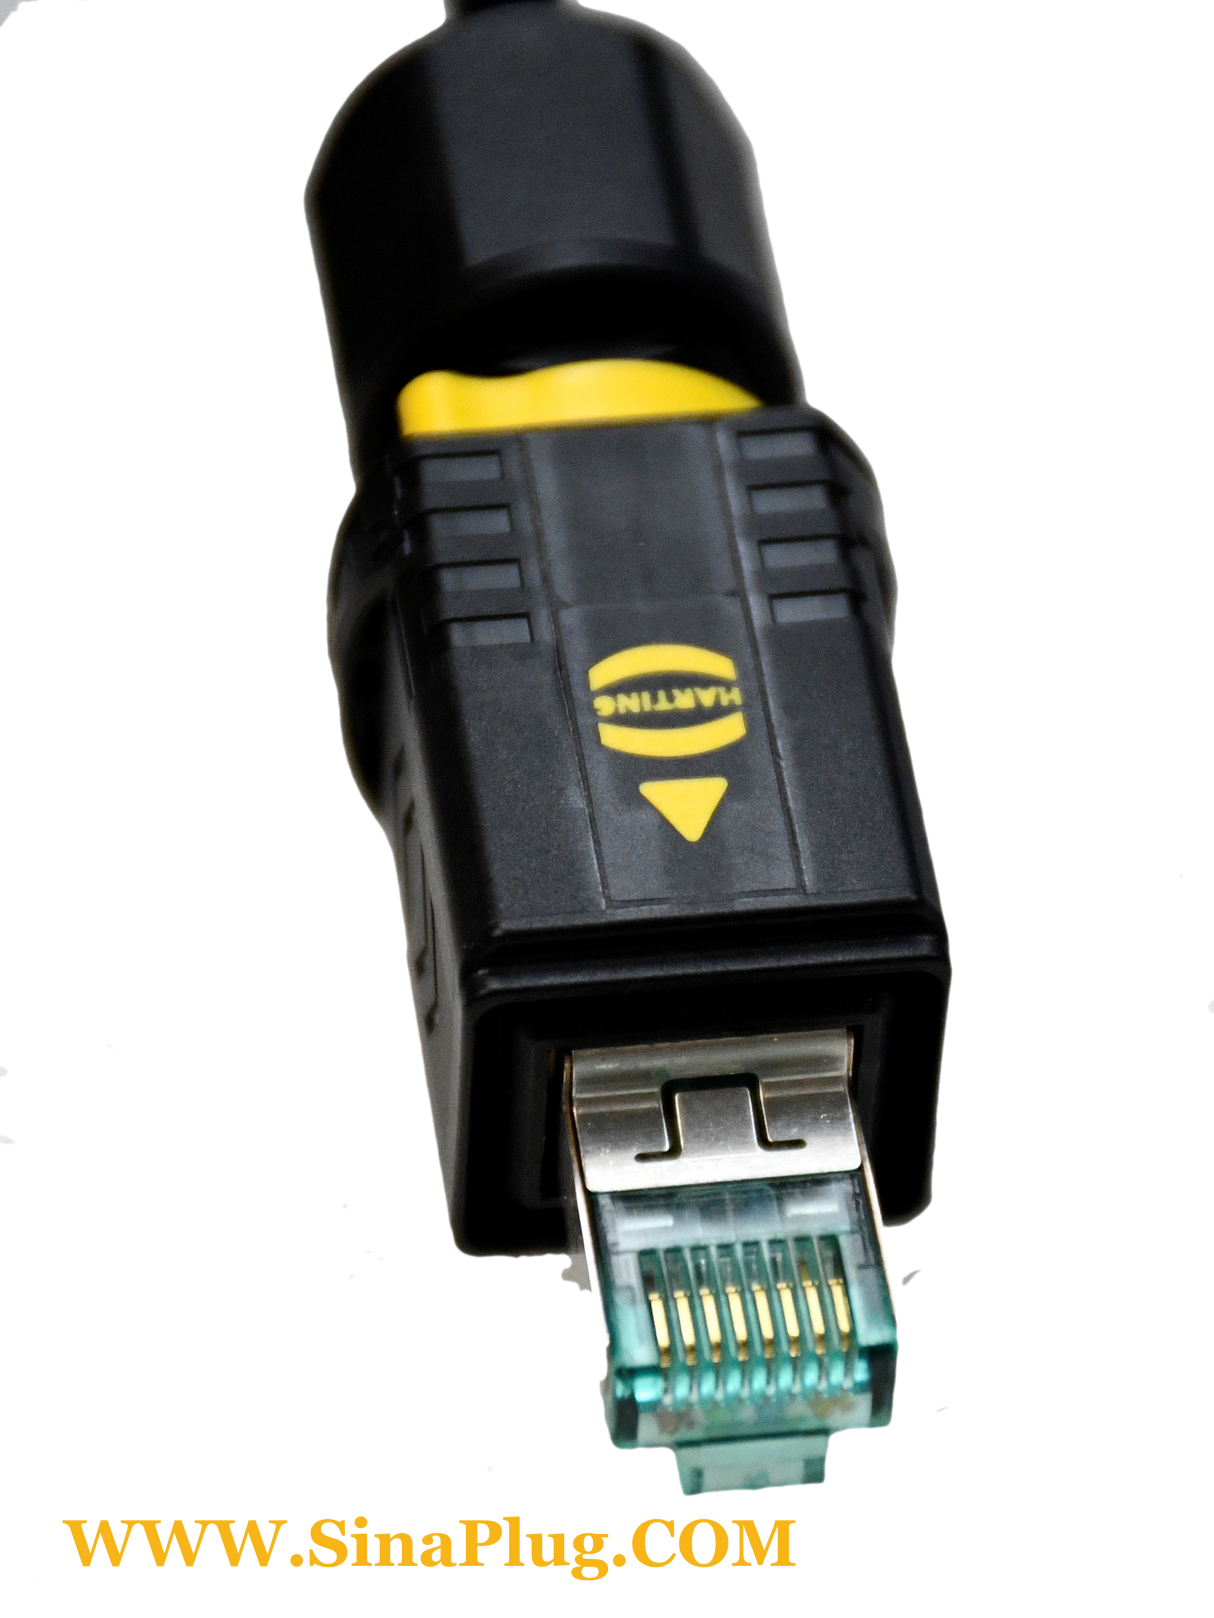 PushPull V4 v2.0 RJ45 Cat6a Overmolded Patch Cable - PP RJ45 to IP20 RJ